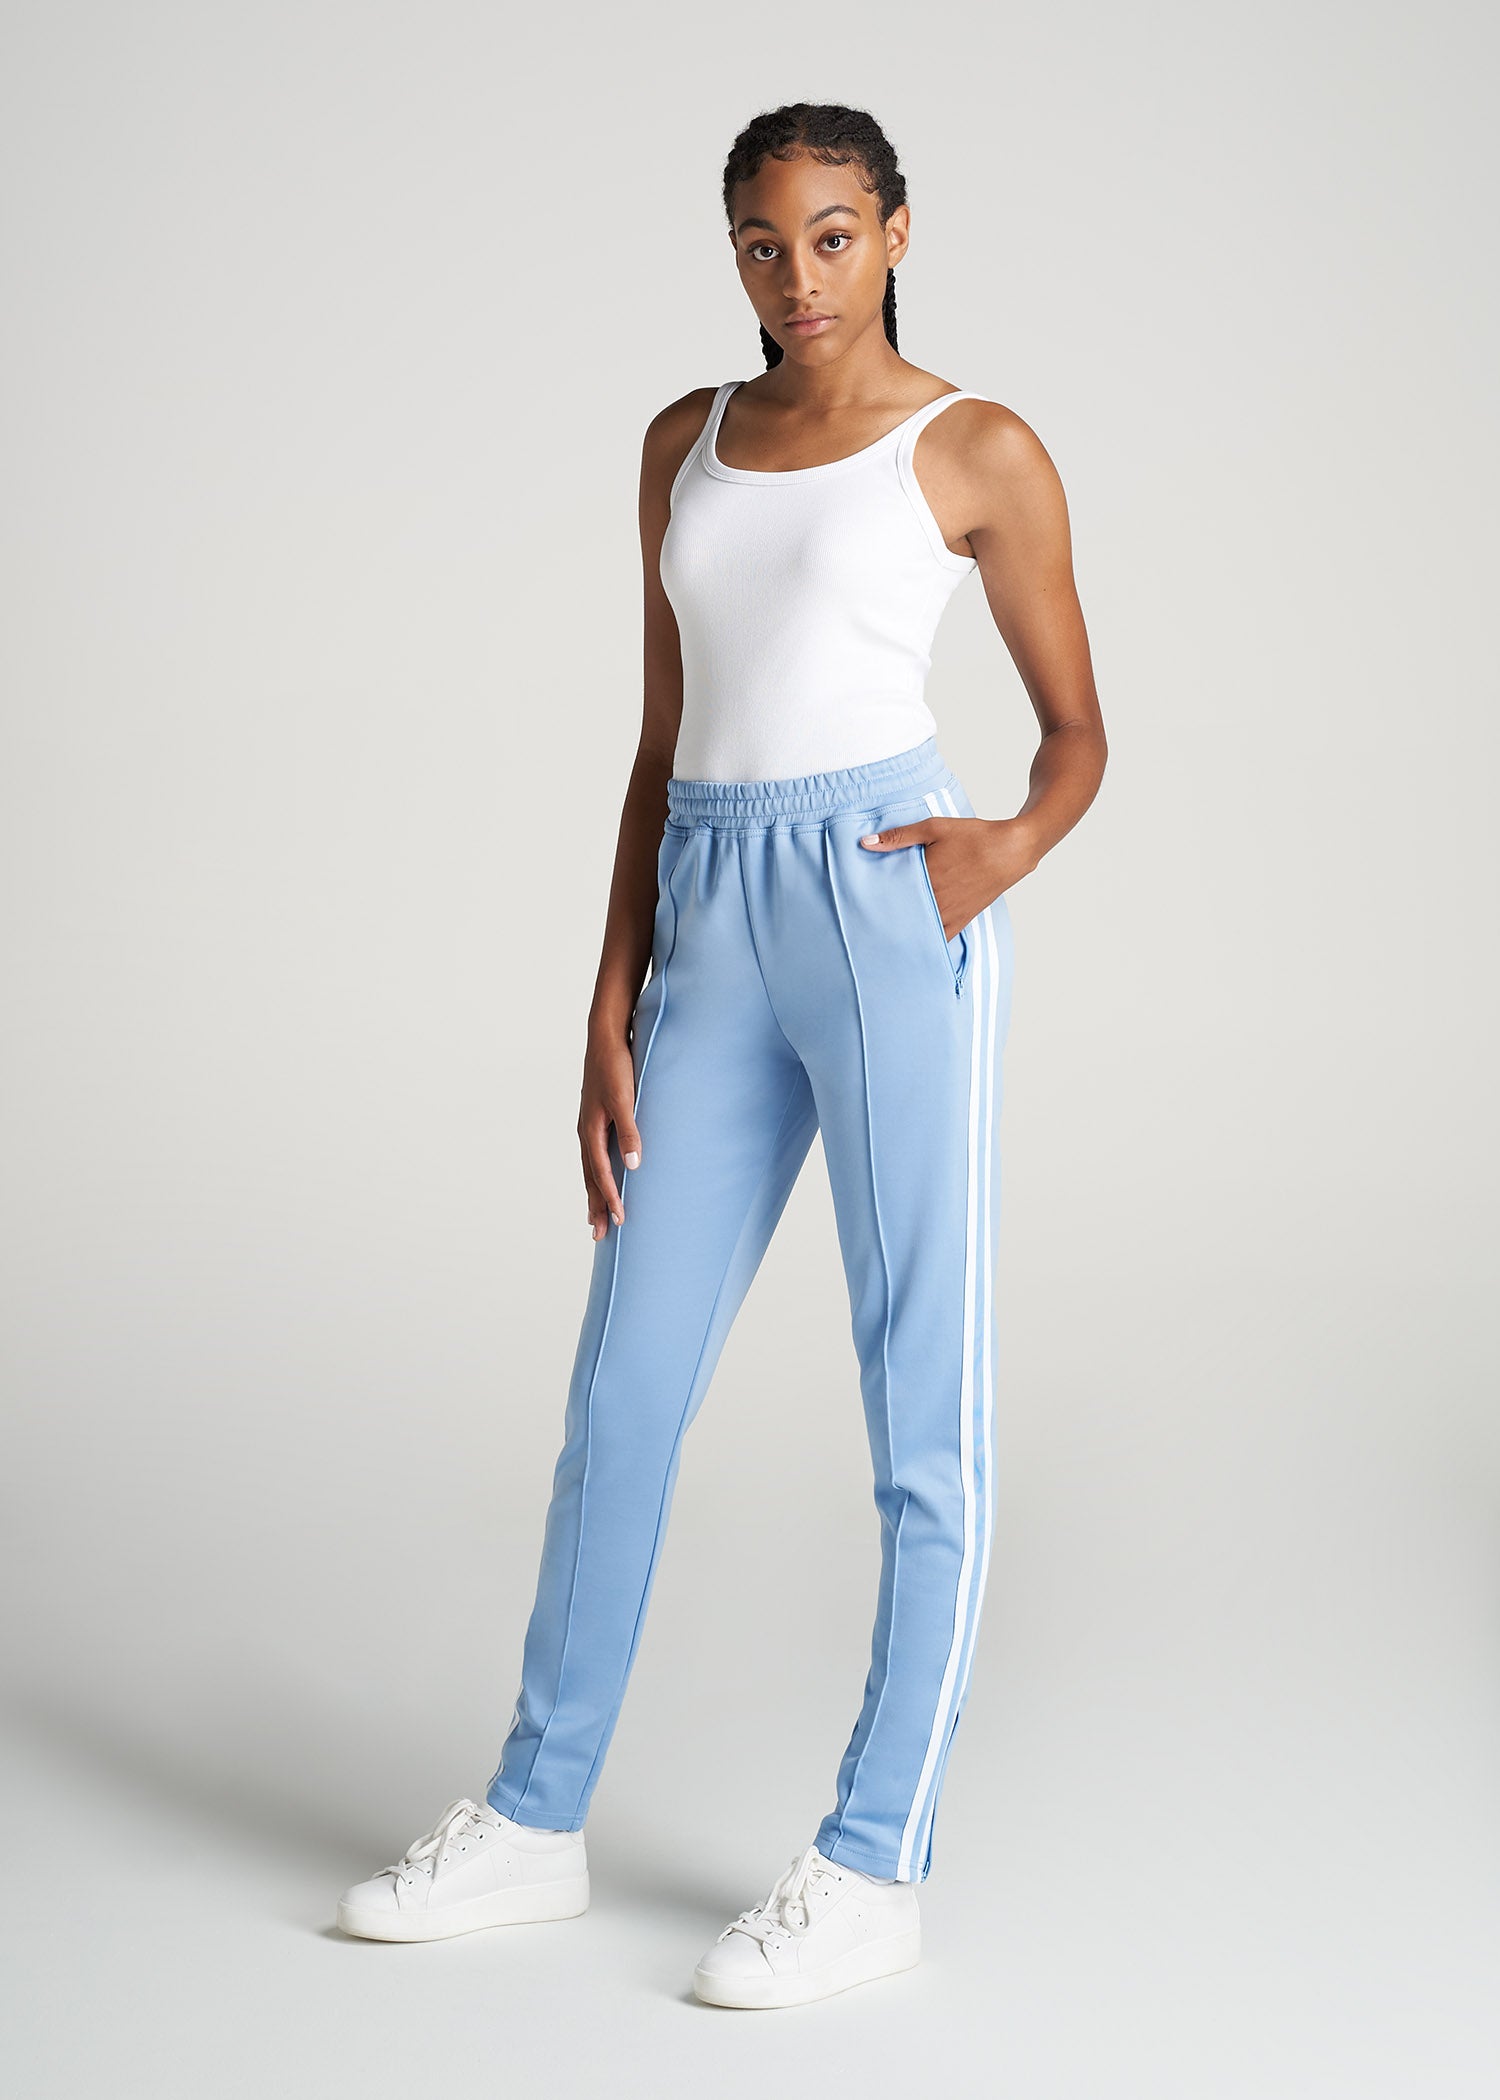 Women's Tall Athletic Pants in Cloud Blue & White